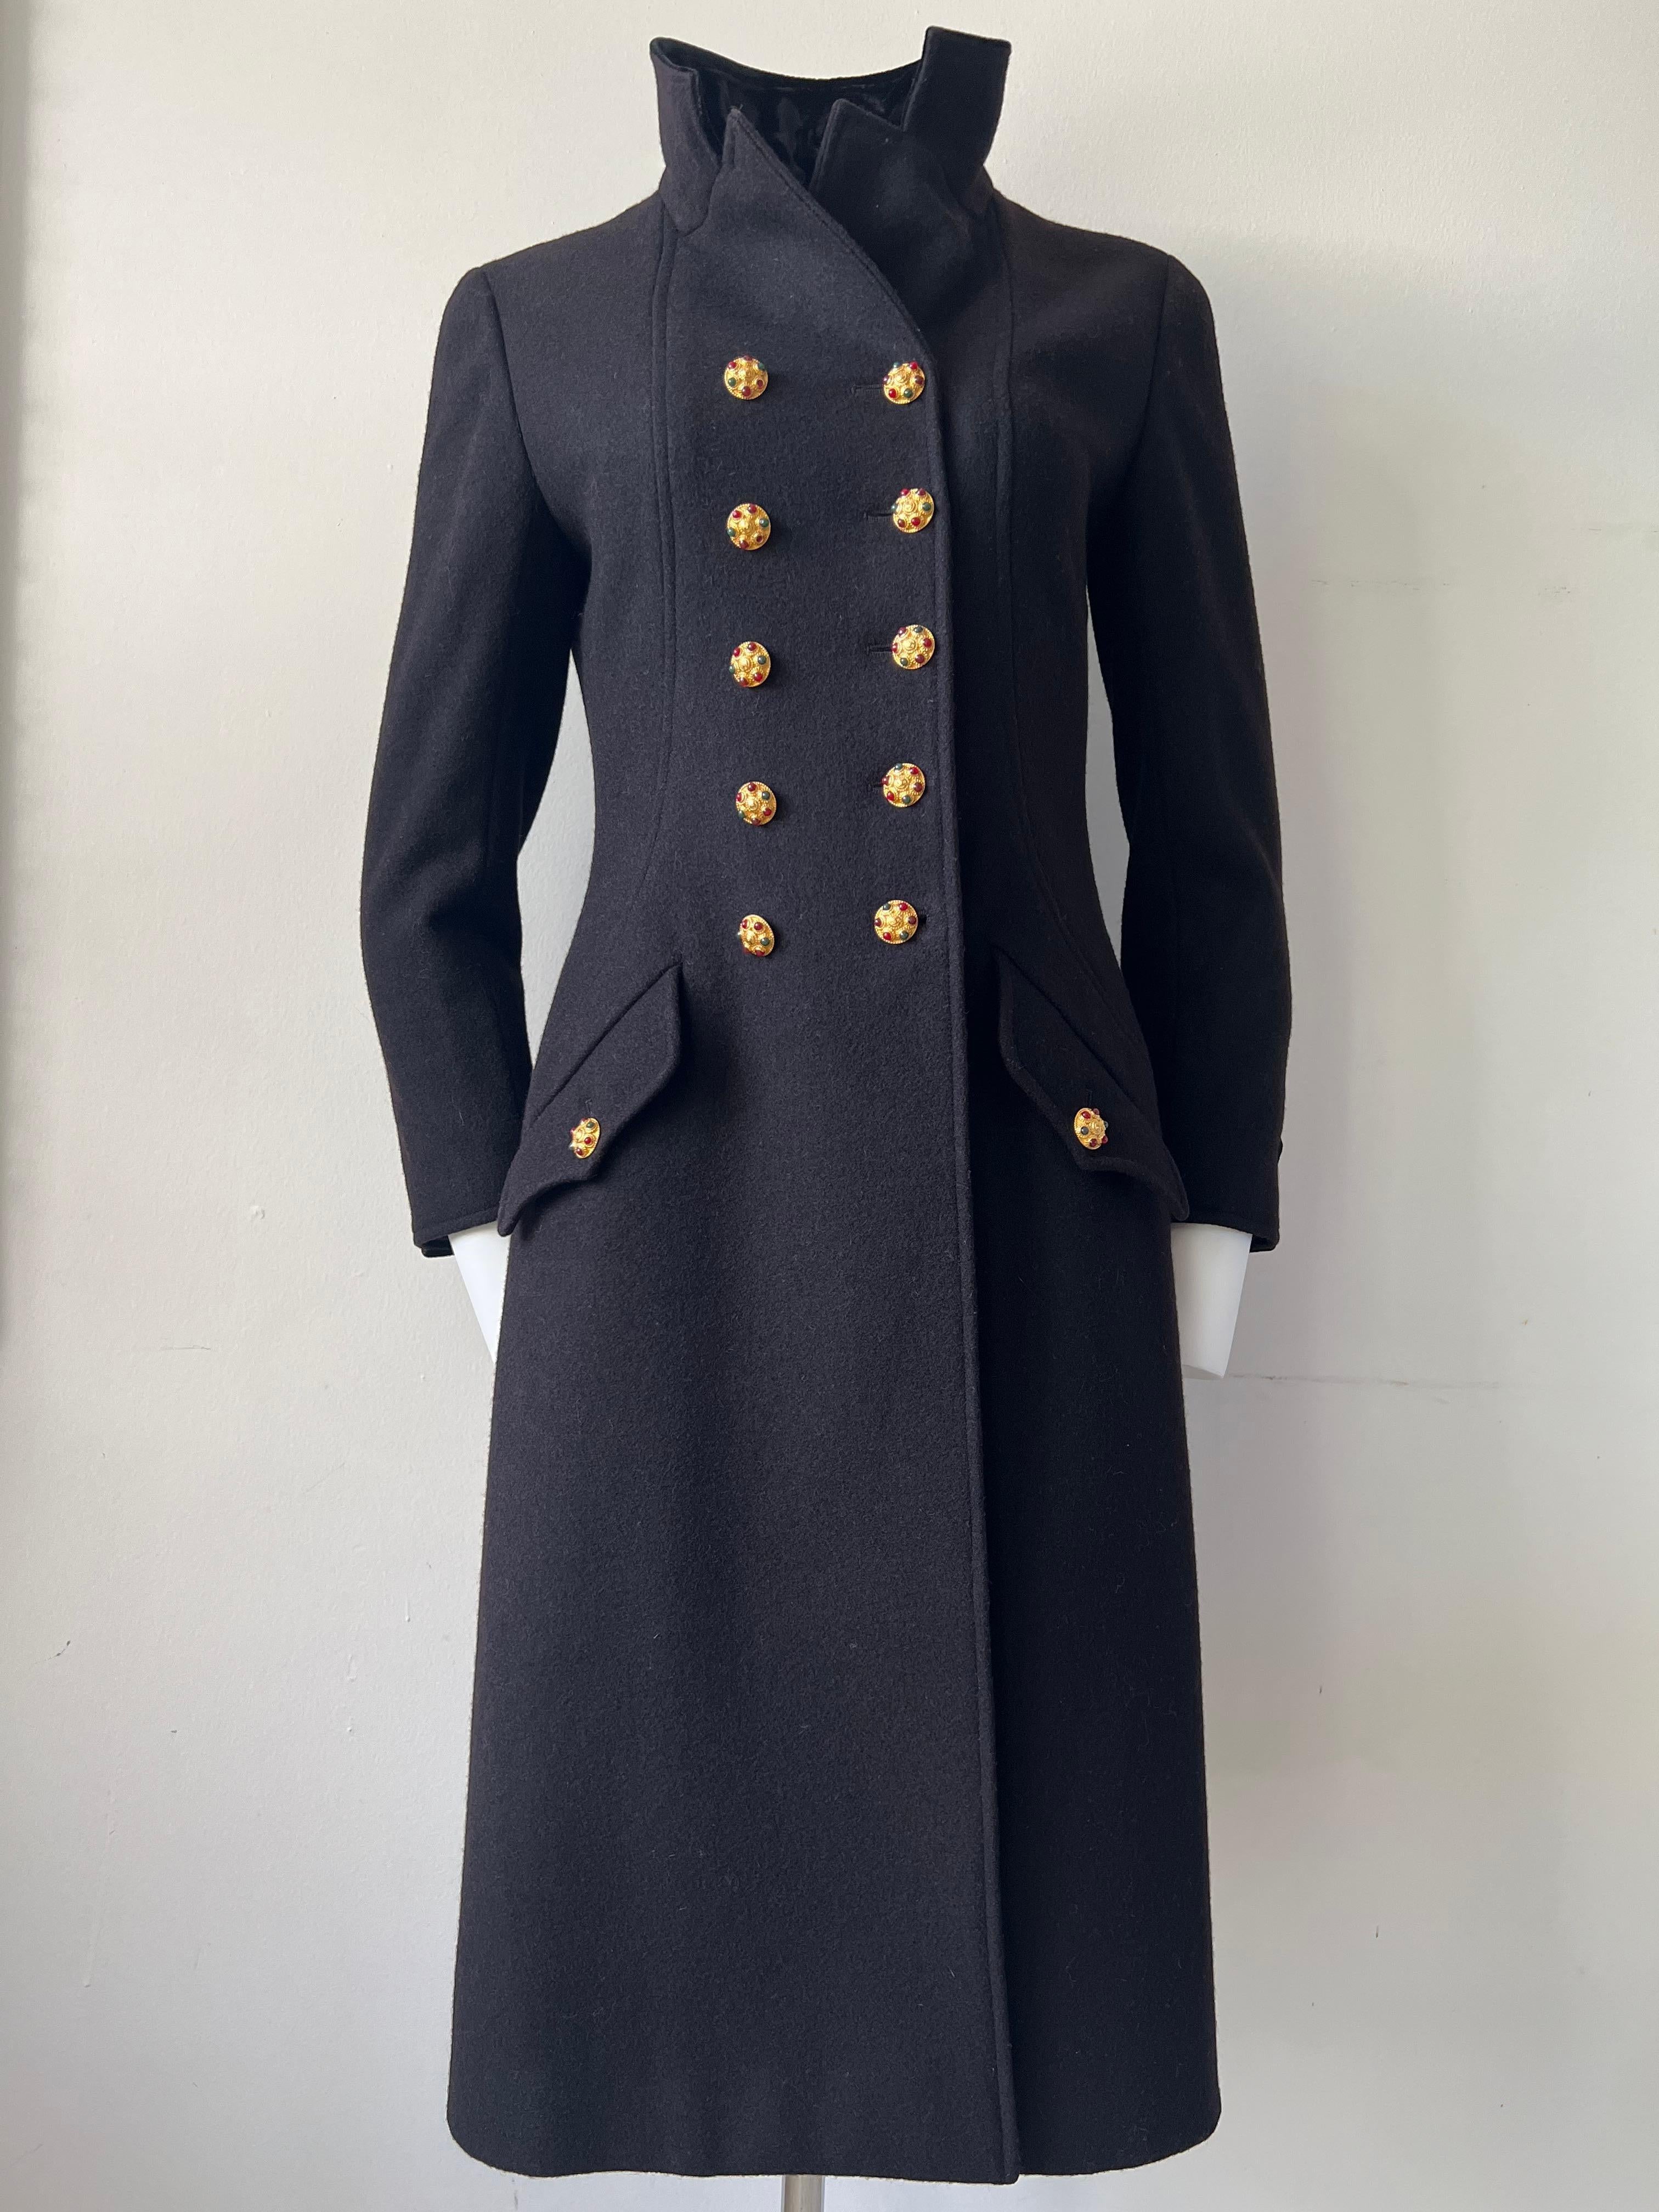 Extraordinary officer's coat in wool and black velvet, double row of ten Gripoix Chanel buttons. Two buttons on the pockets, Three on the back of each sleeve. A velvet band has two buttons on the back of the jacket. Silk lining. Chanel year 1996. 